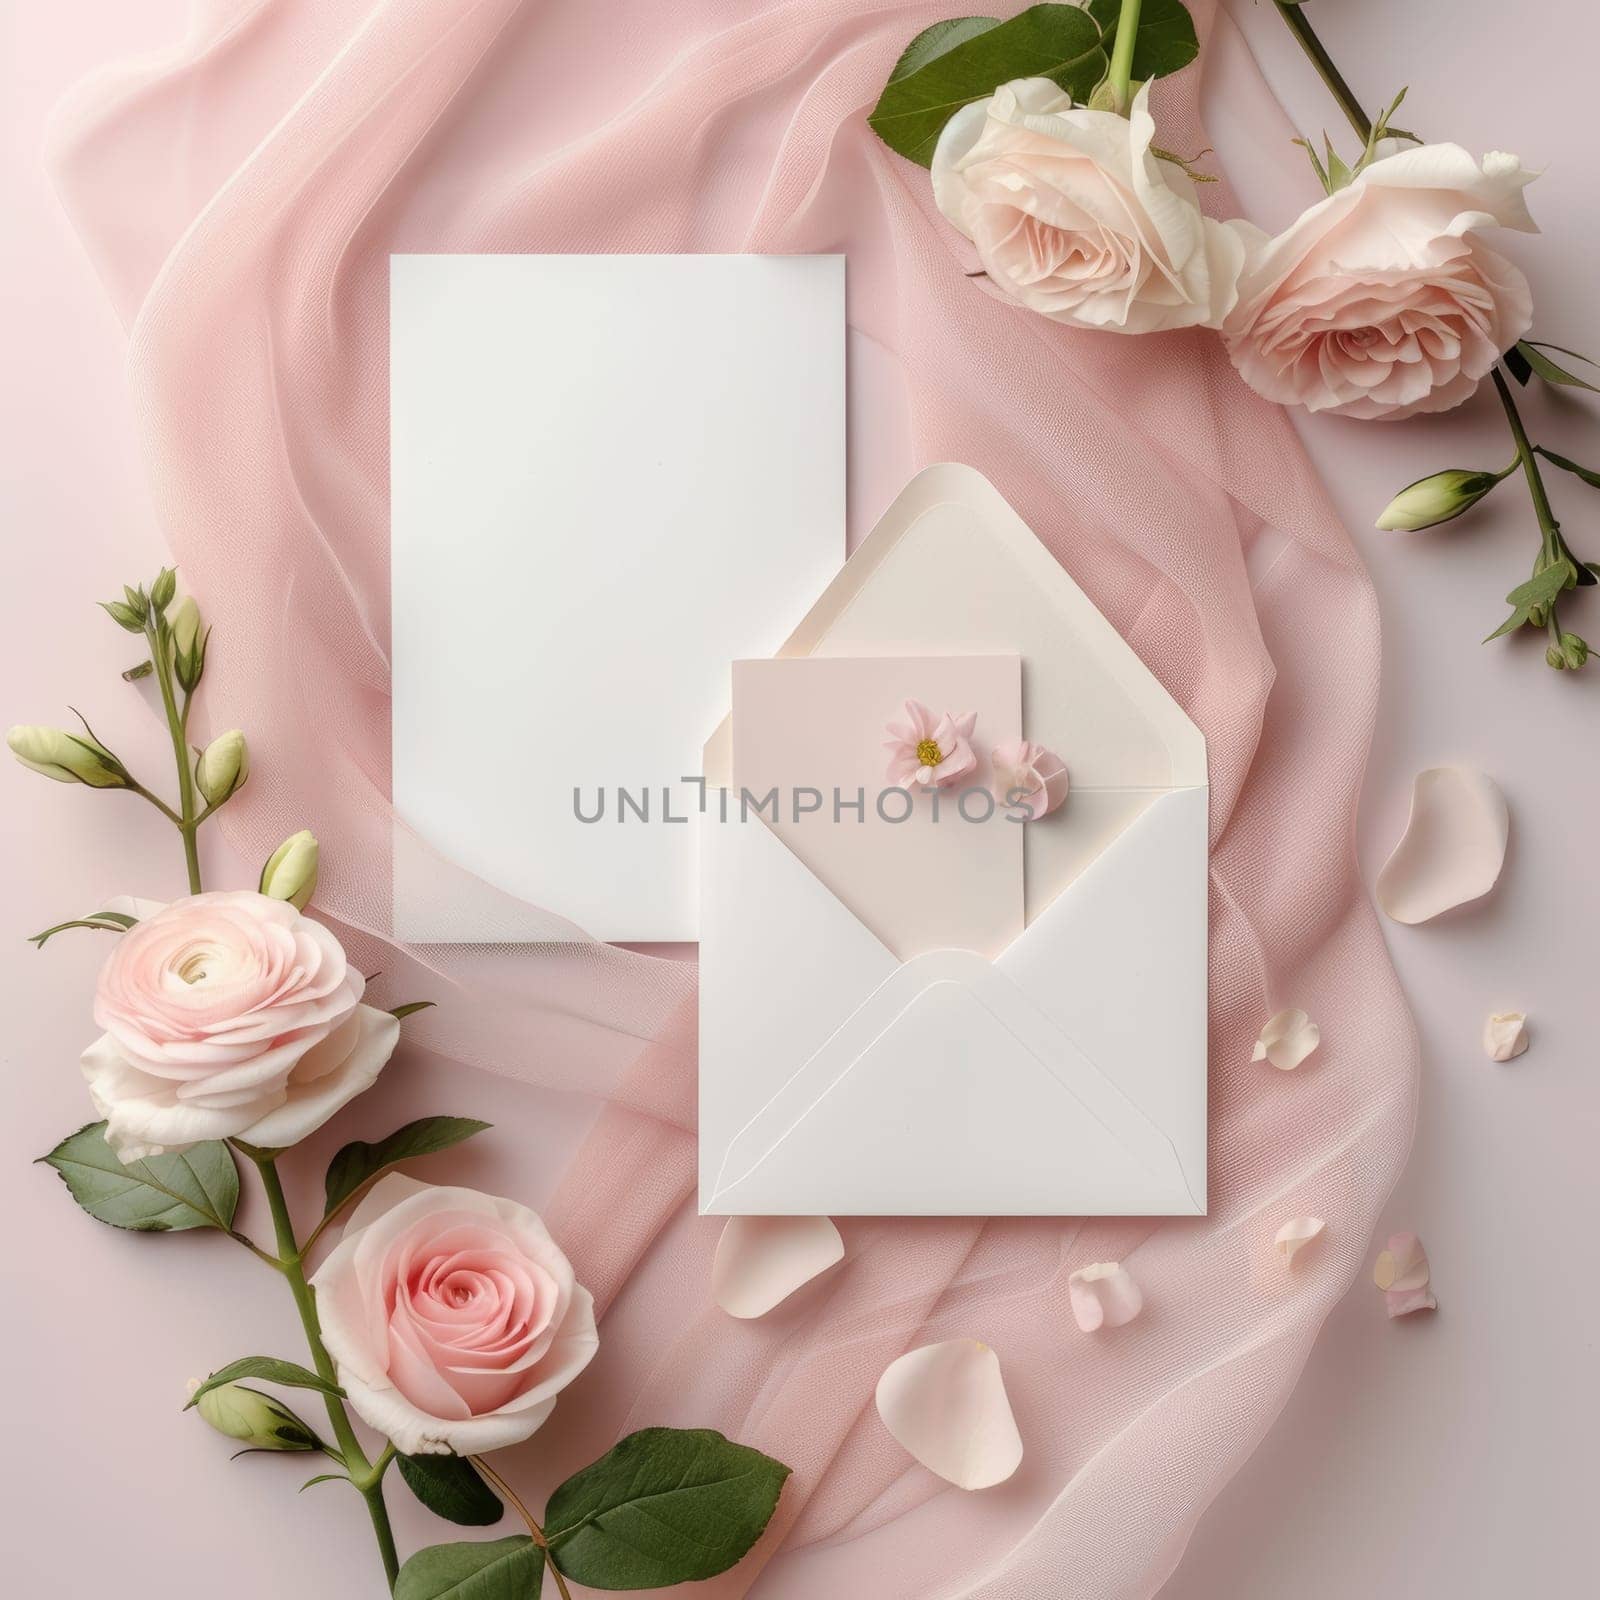 Delicate pink stationery envelopes and cards are showcased amidst a soft fabric background with blooming roses, conveying a romantic and tender message setting. The aesthetic is gentle and dreamy